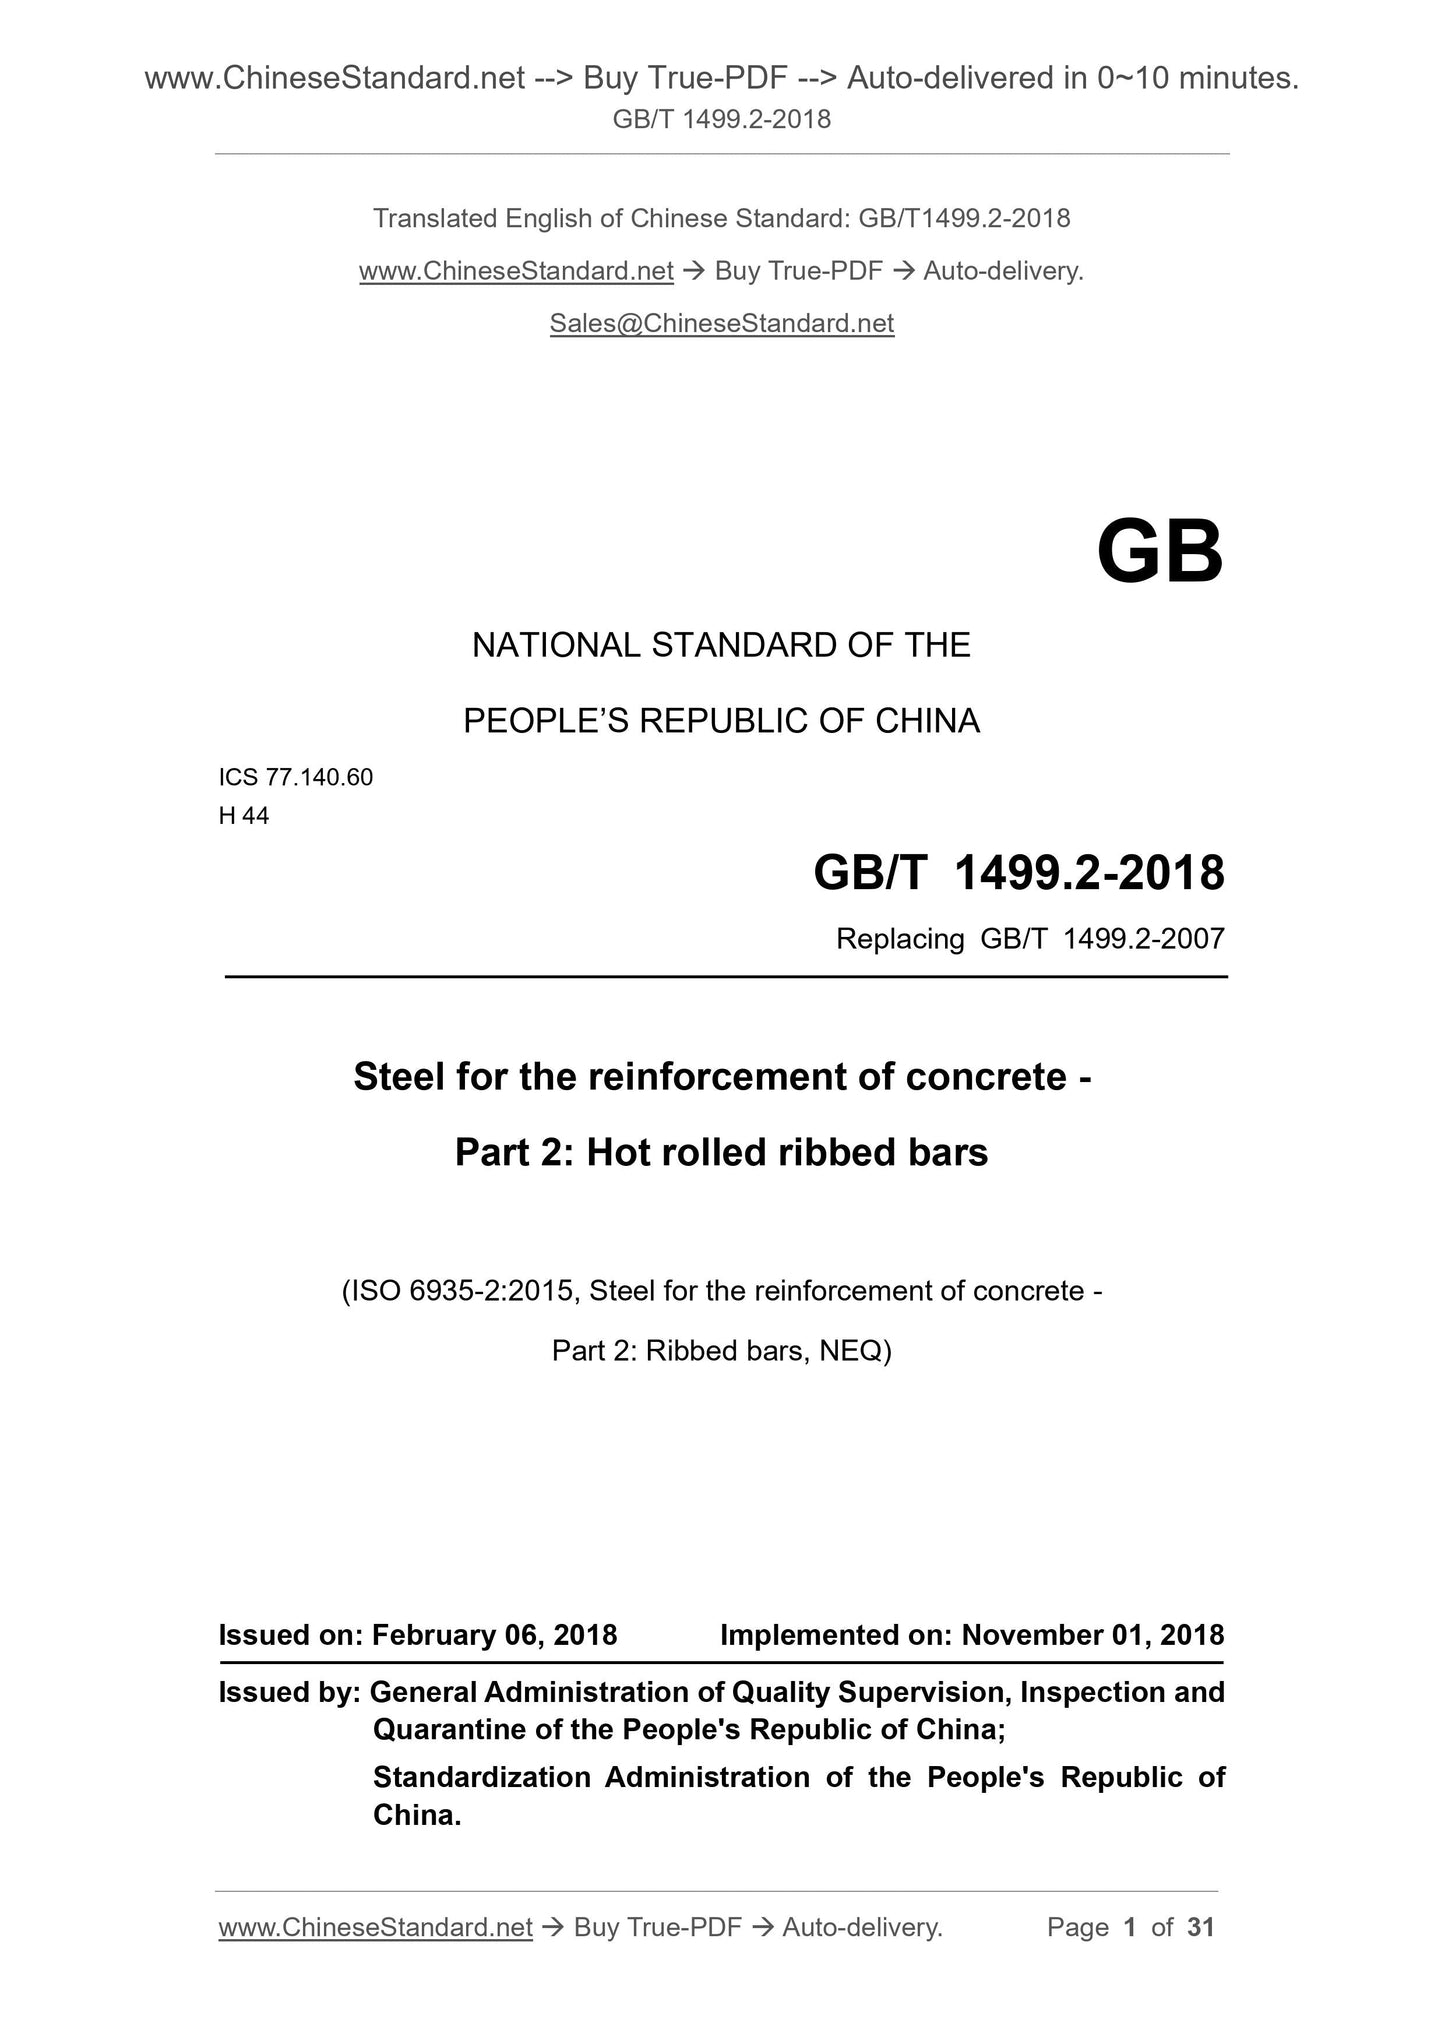 GB/T 1499.2-2018 Page 1